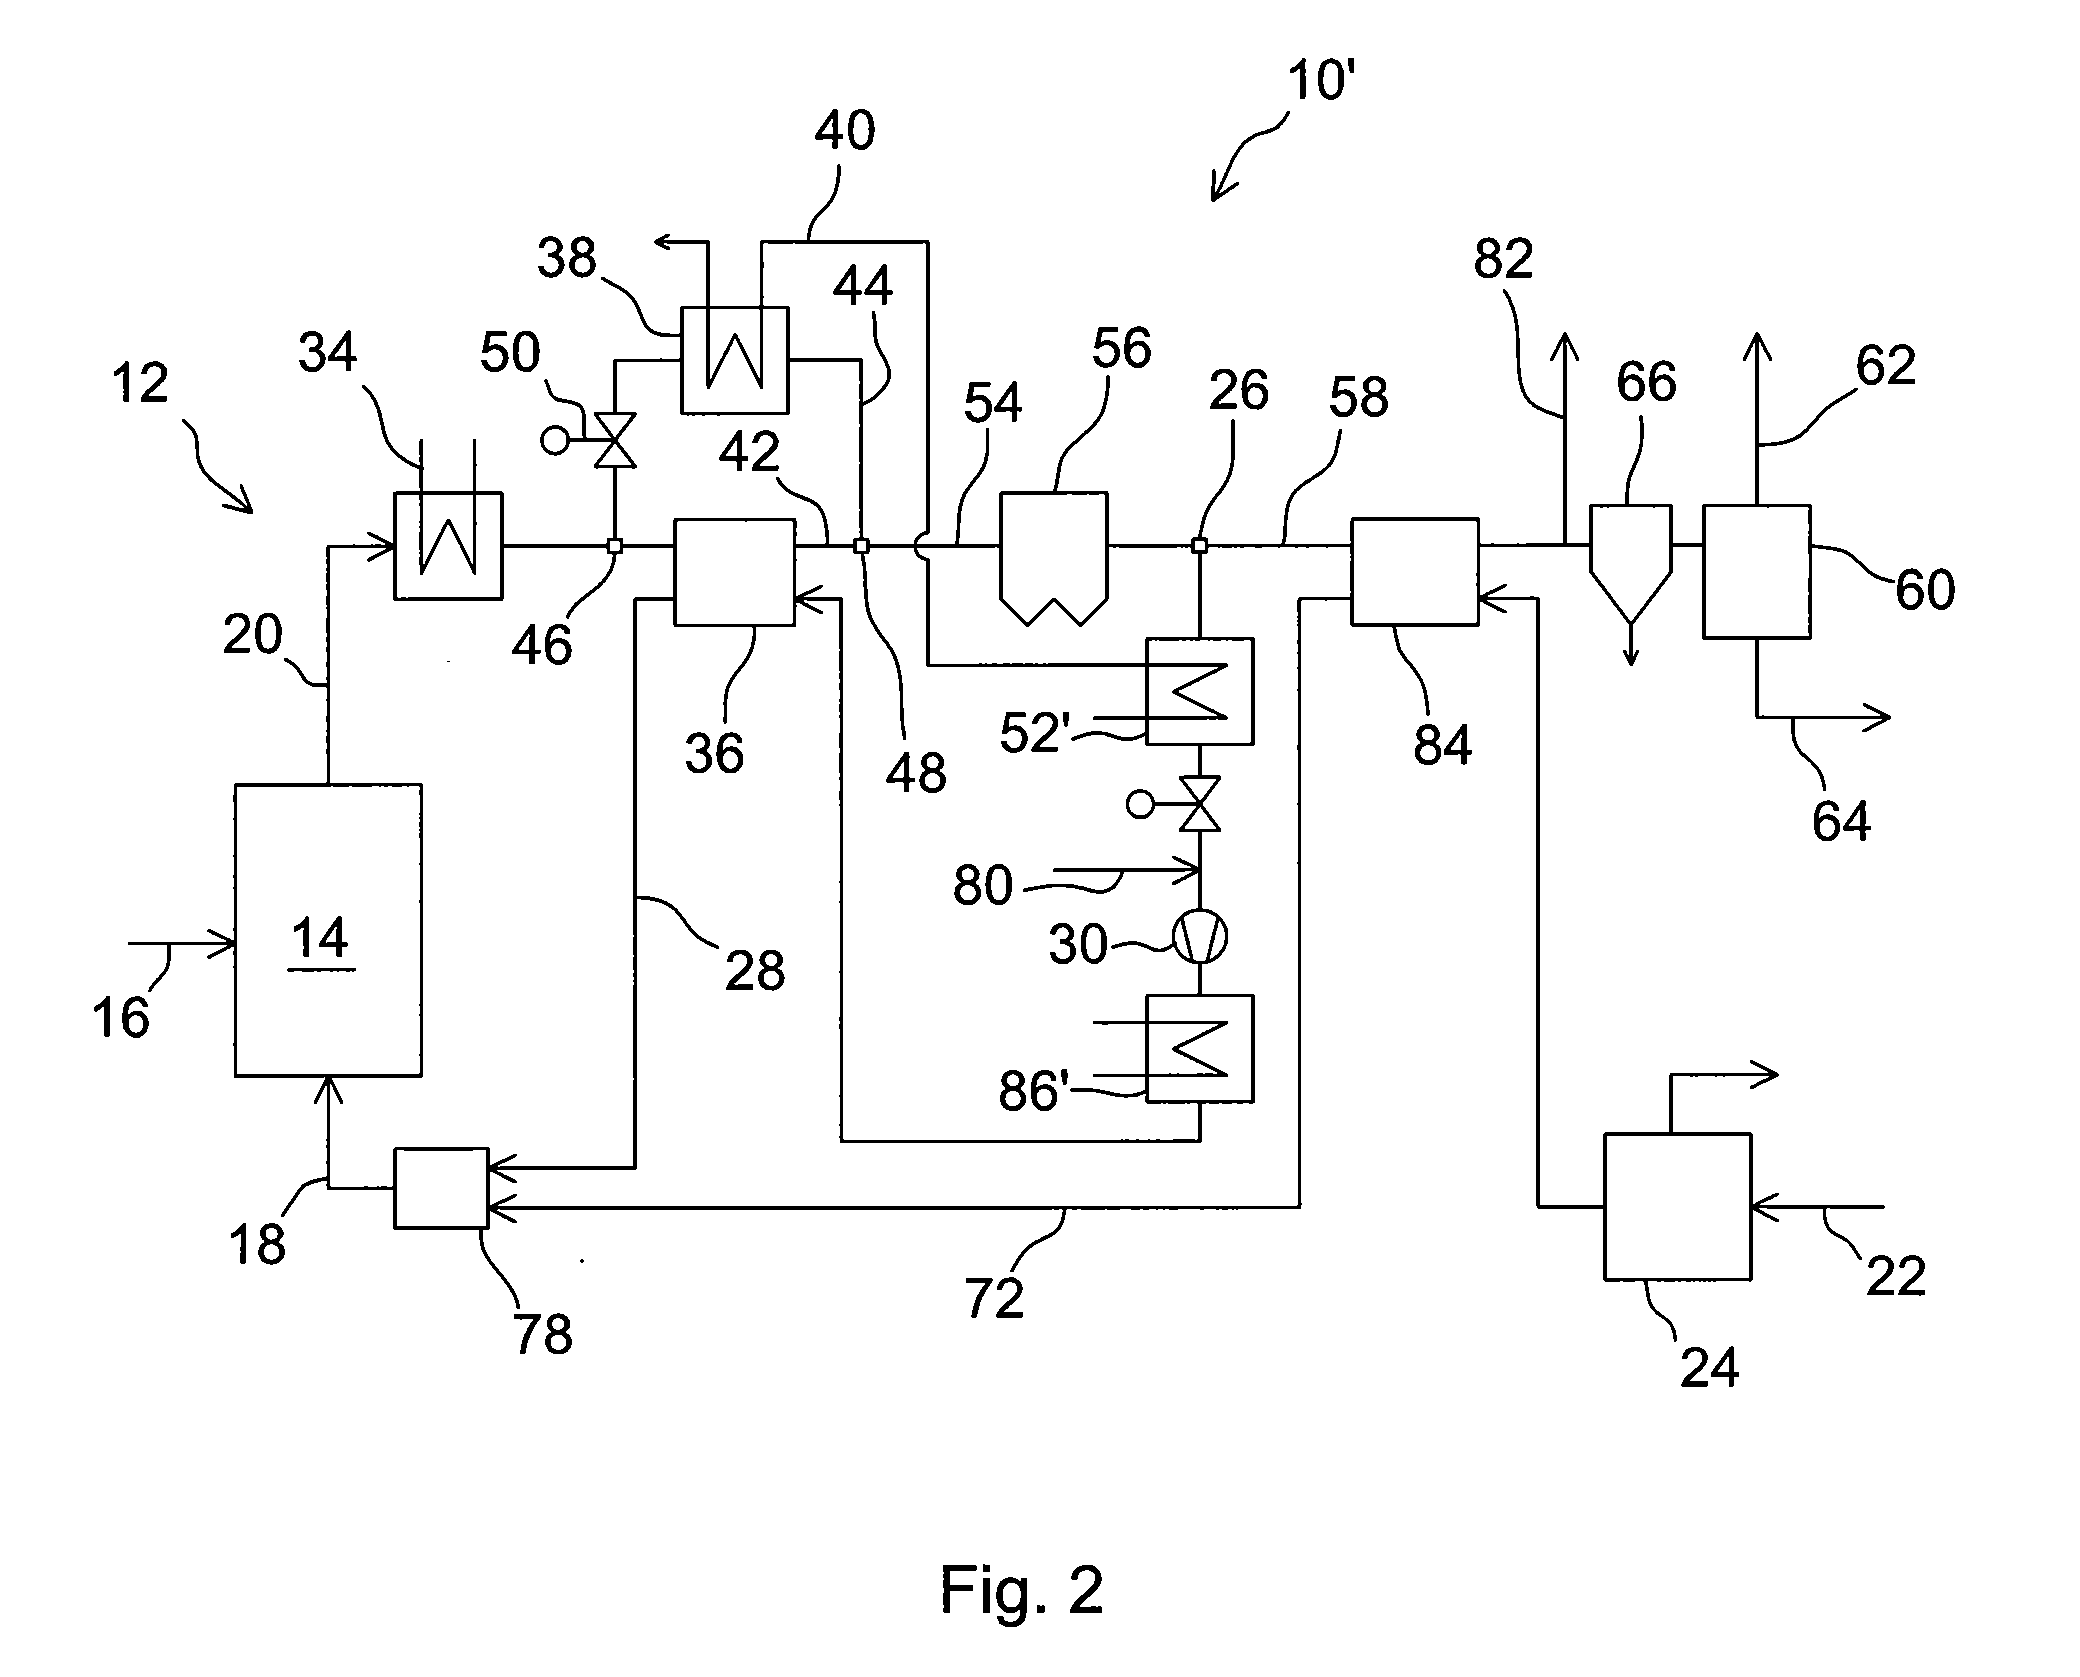 Method of and System For Generating Power By Oxyfuel Combustion